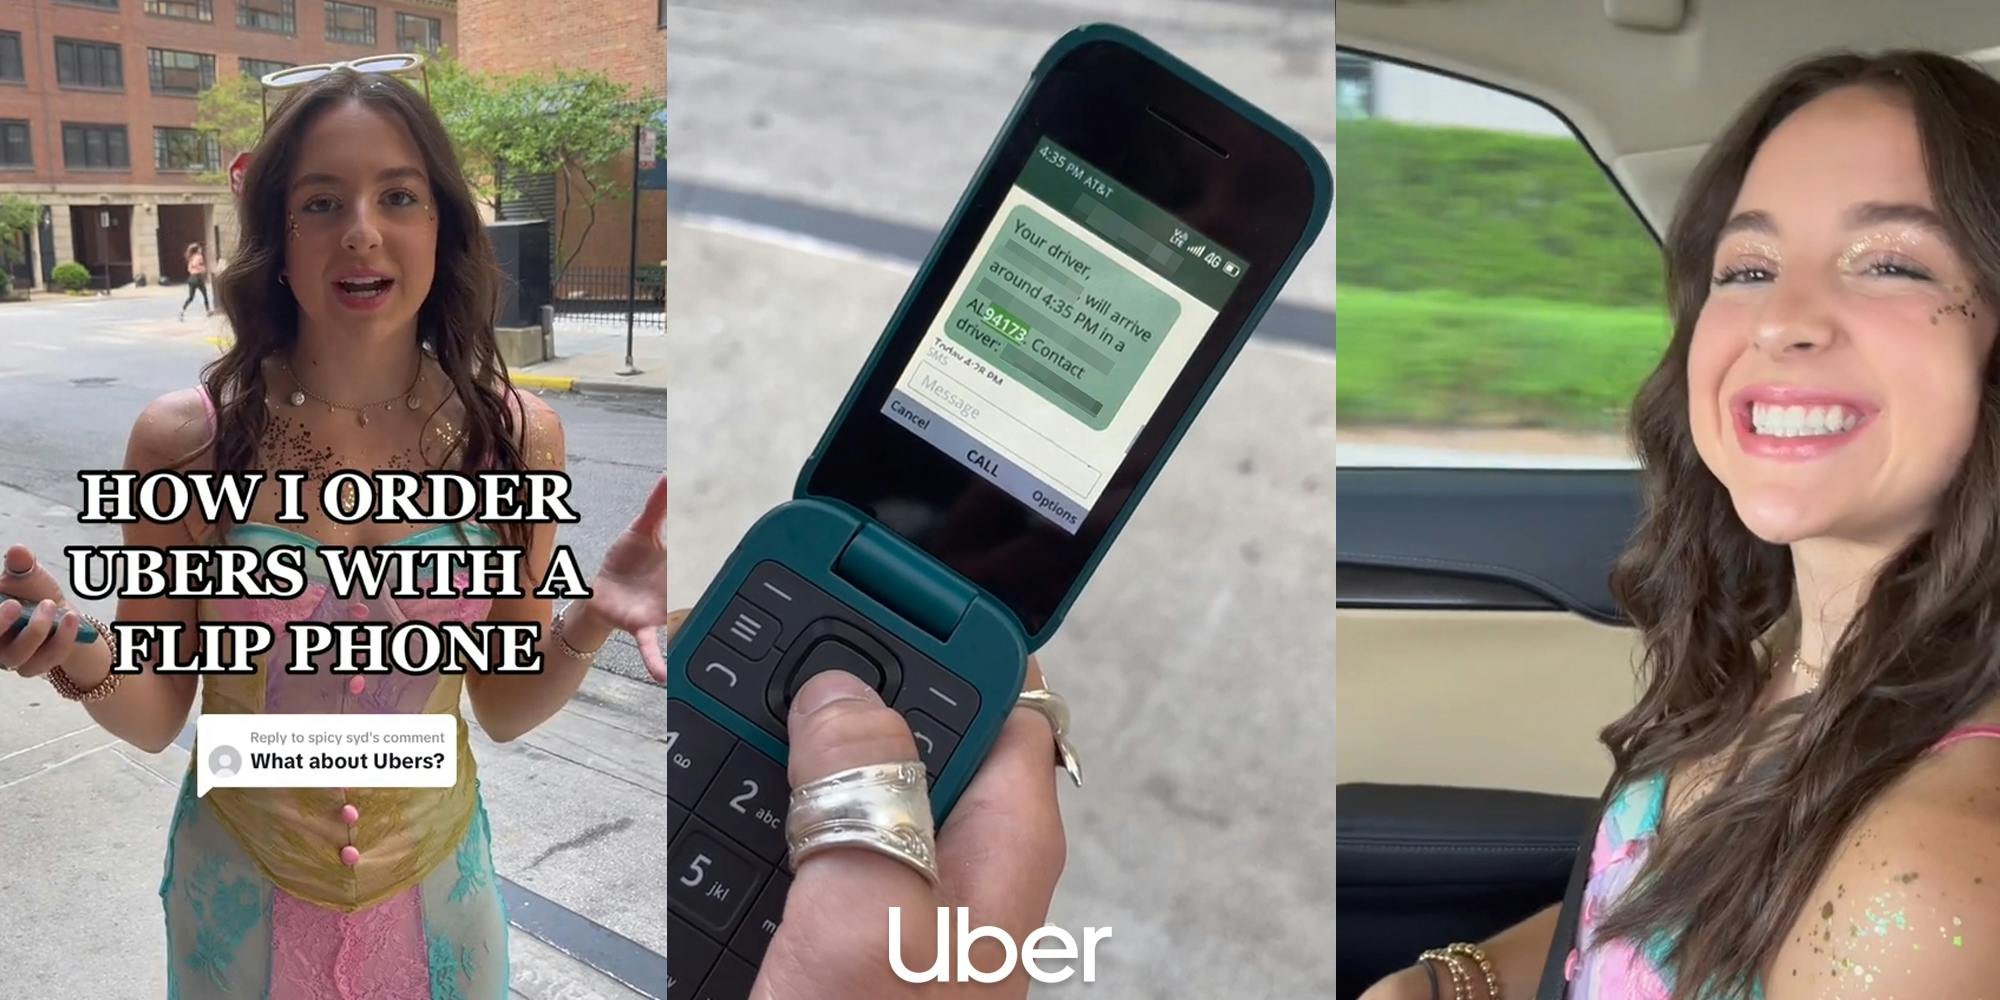 'So you called a cab .... ?': Woman gets roasted for showing how she orders an Uber on a flip phone